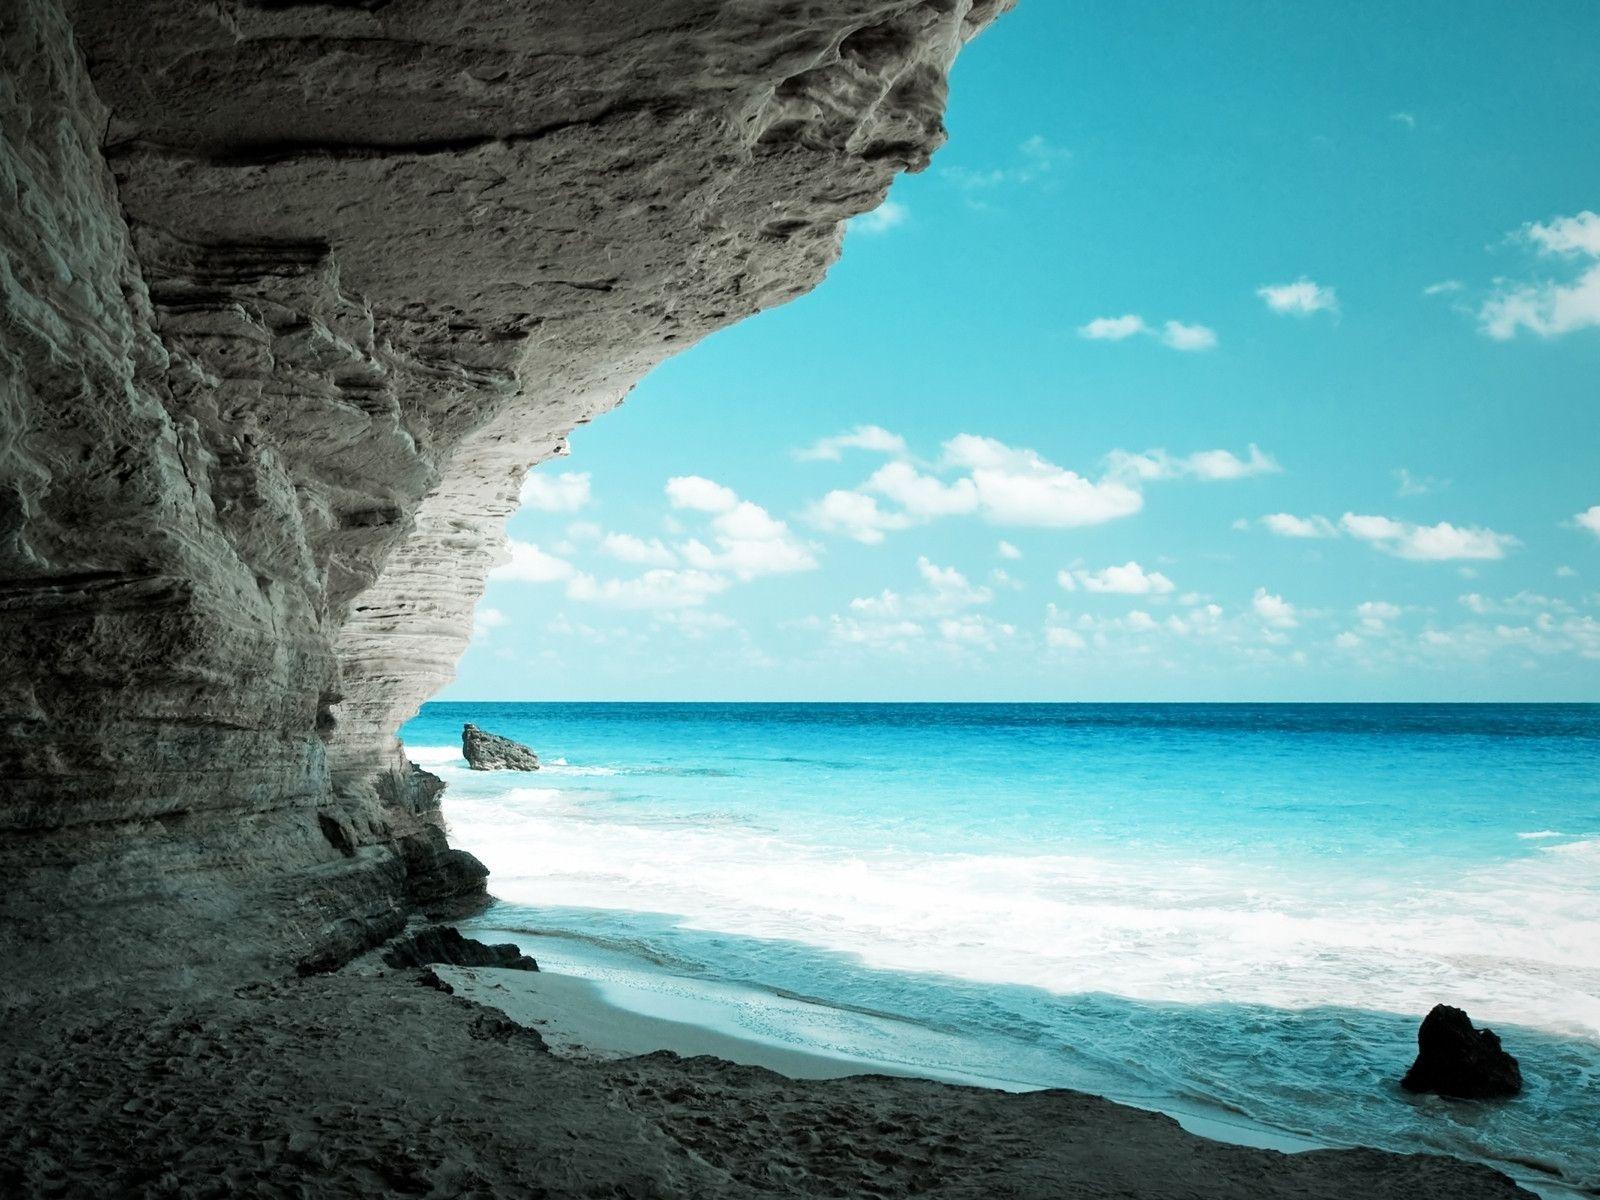 Free Cave On Blue Waters Wallpaper, Free Cave On Blue Waters HD